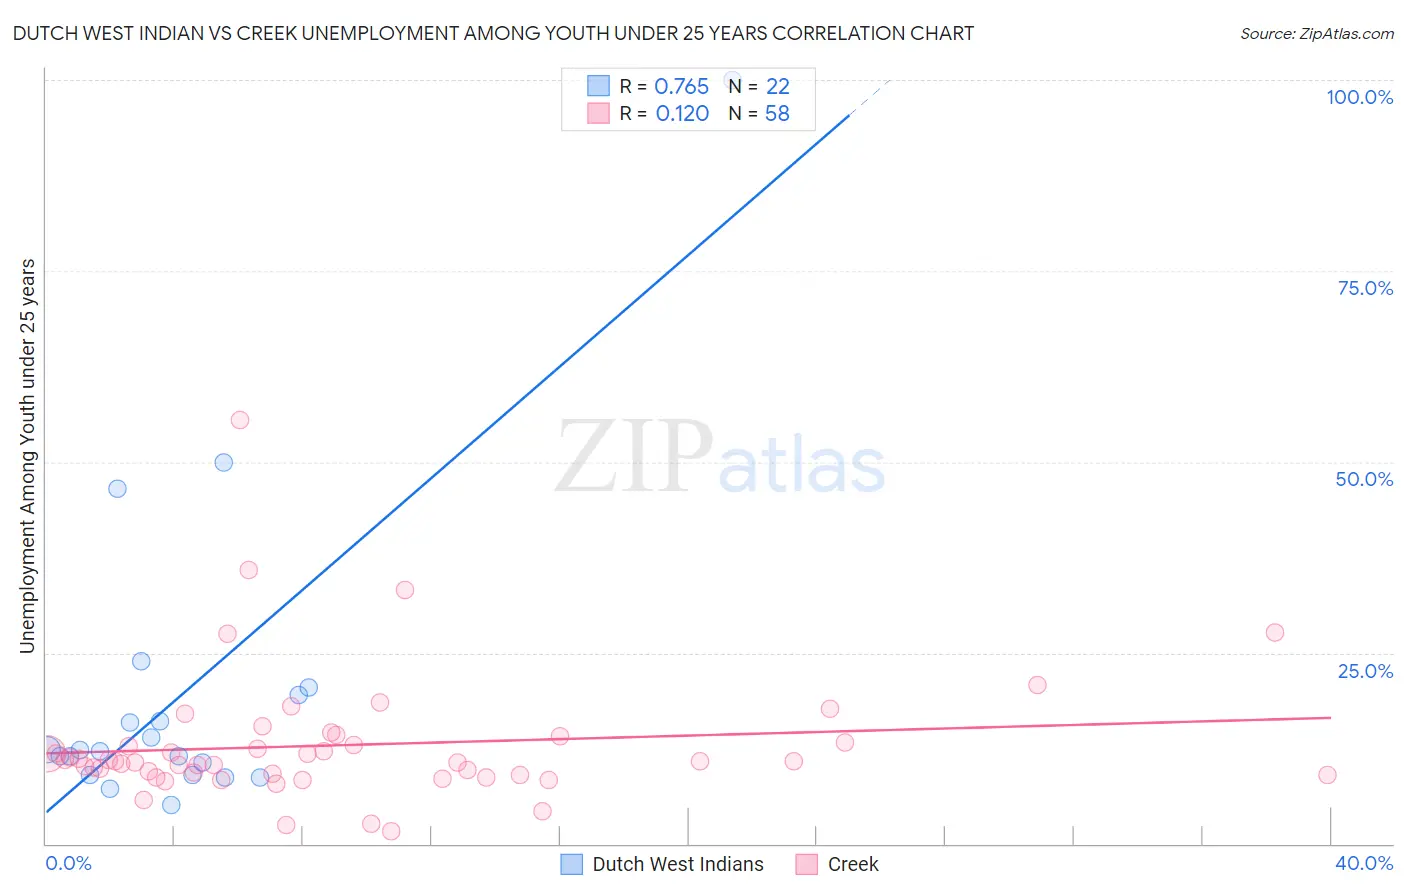 Dutch West Indian vs Creek Unemployment Among Youth under 25 years